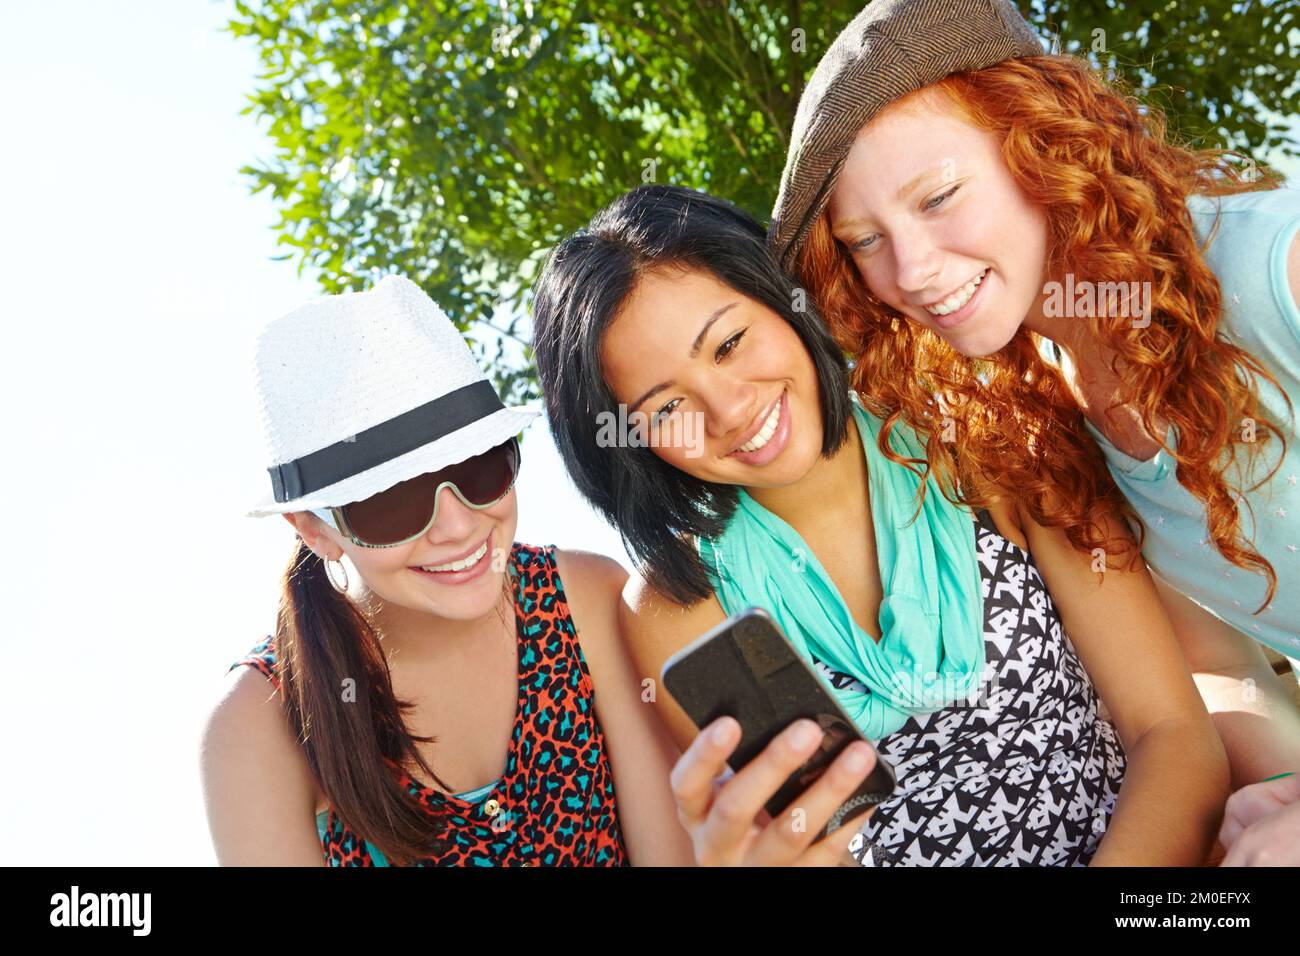 Meet us at the park...Three teenage girls sitting outside with a cellphone smiling at a text message. Stock Photo